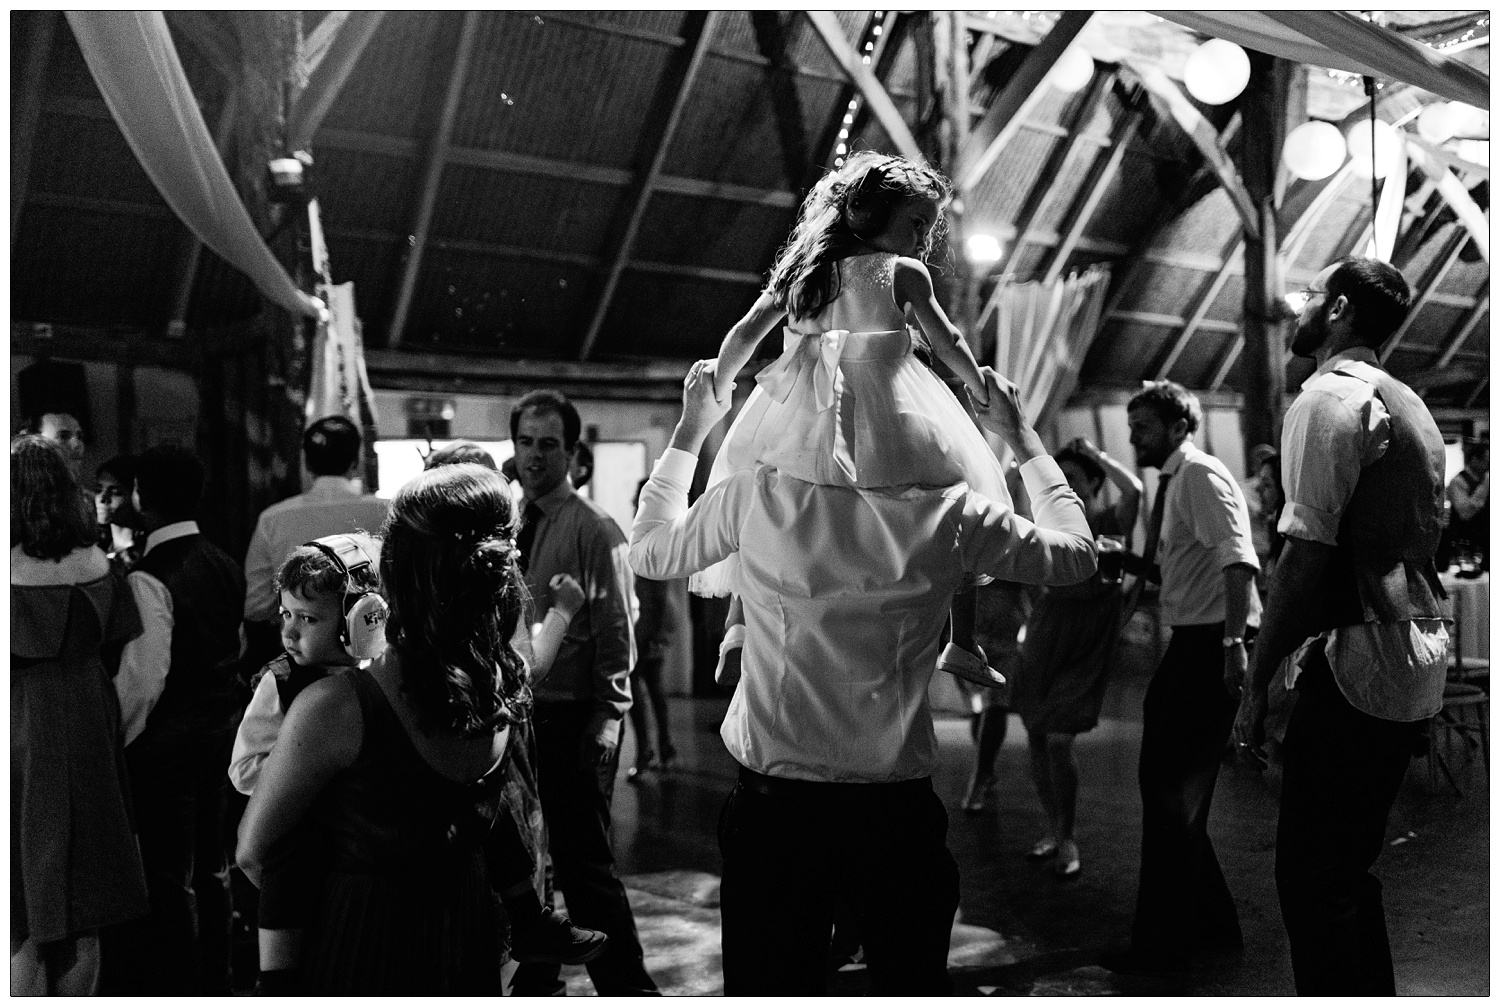 Small girl in a white dress on the shoulders of a man, a young boy wearing ear defenders, on the dancefloor at Alpheton.